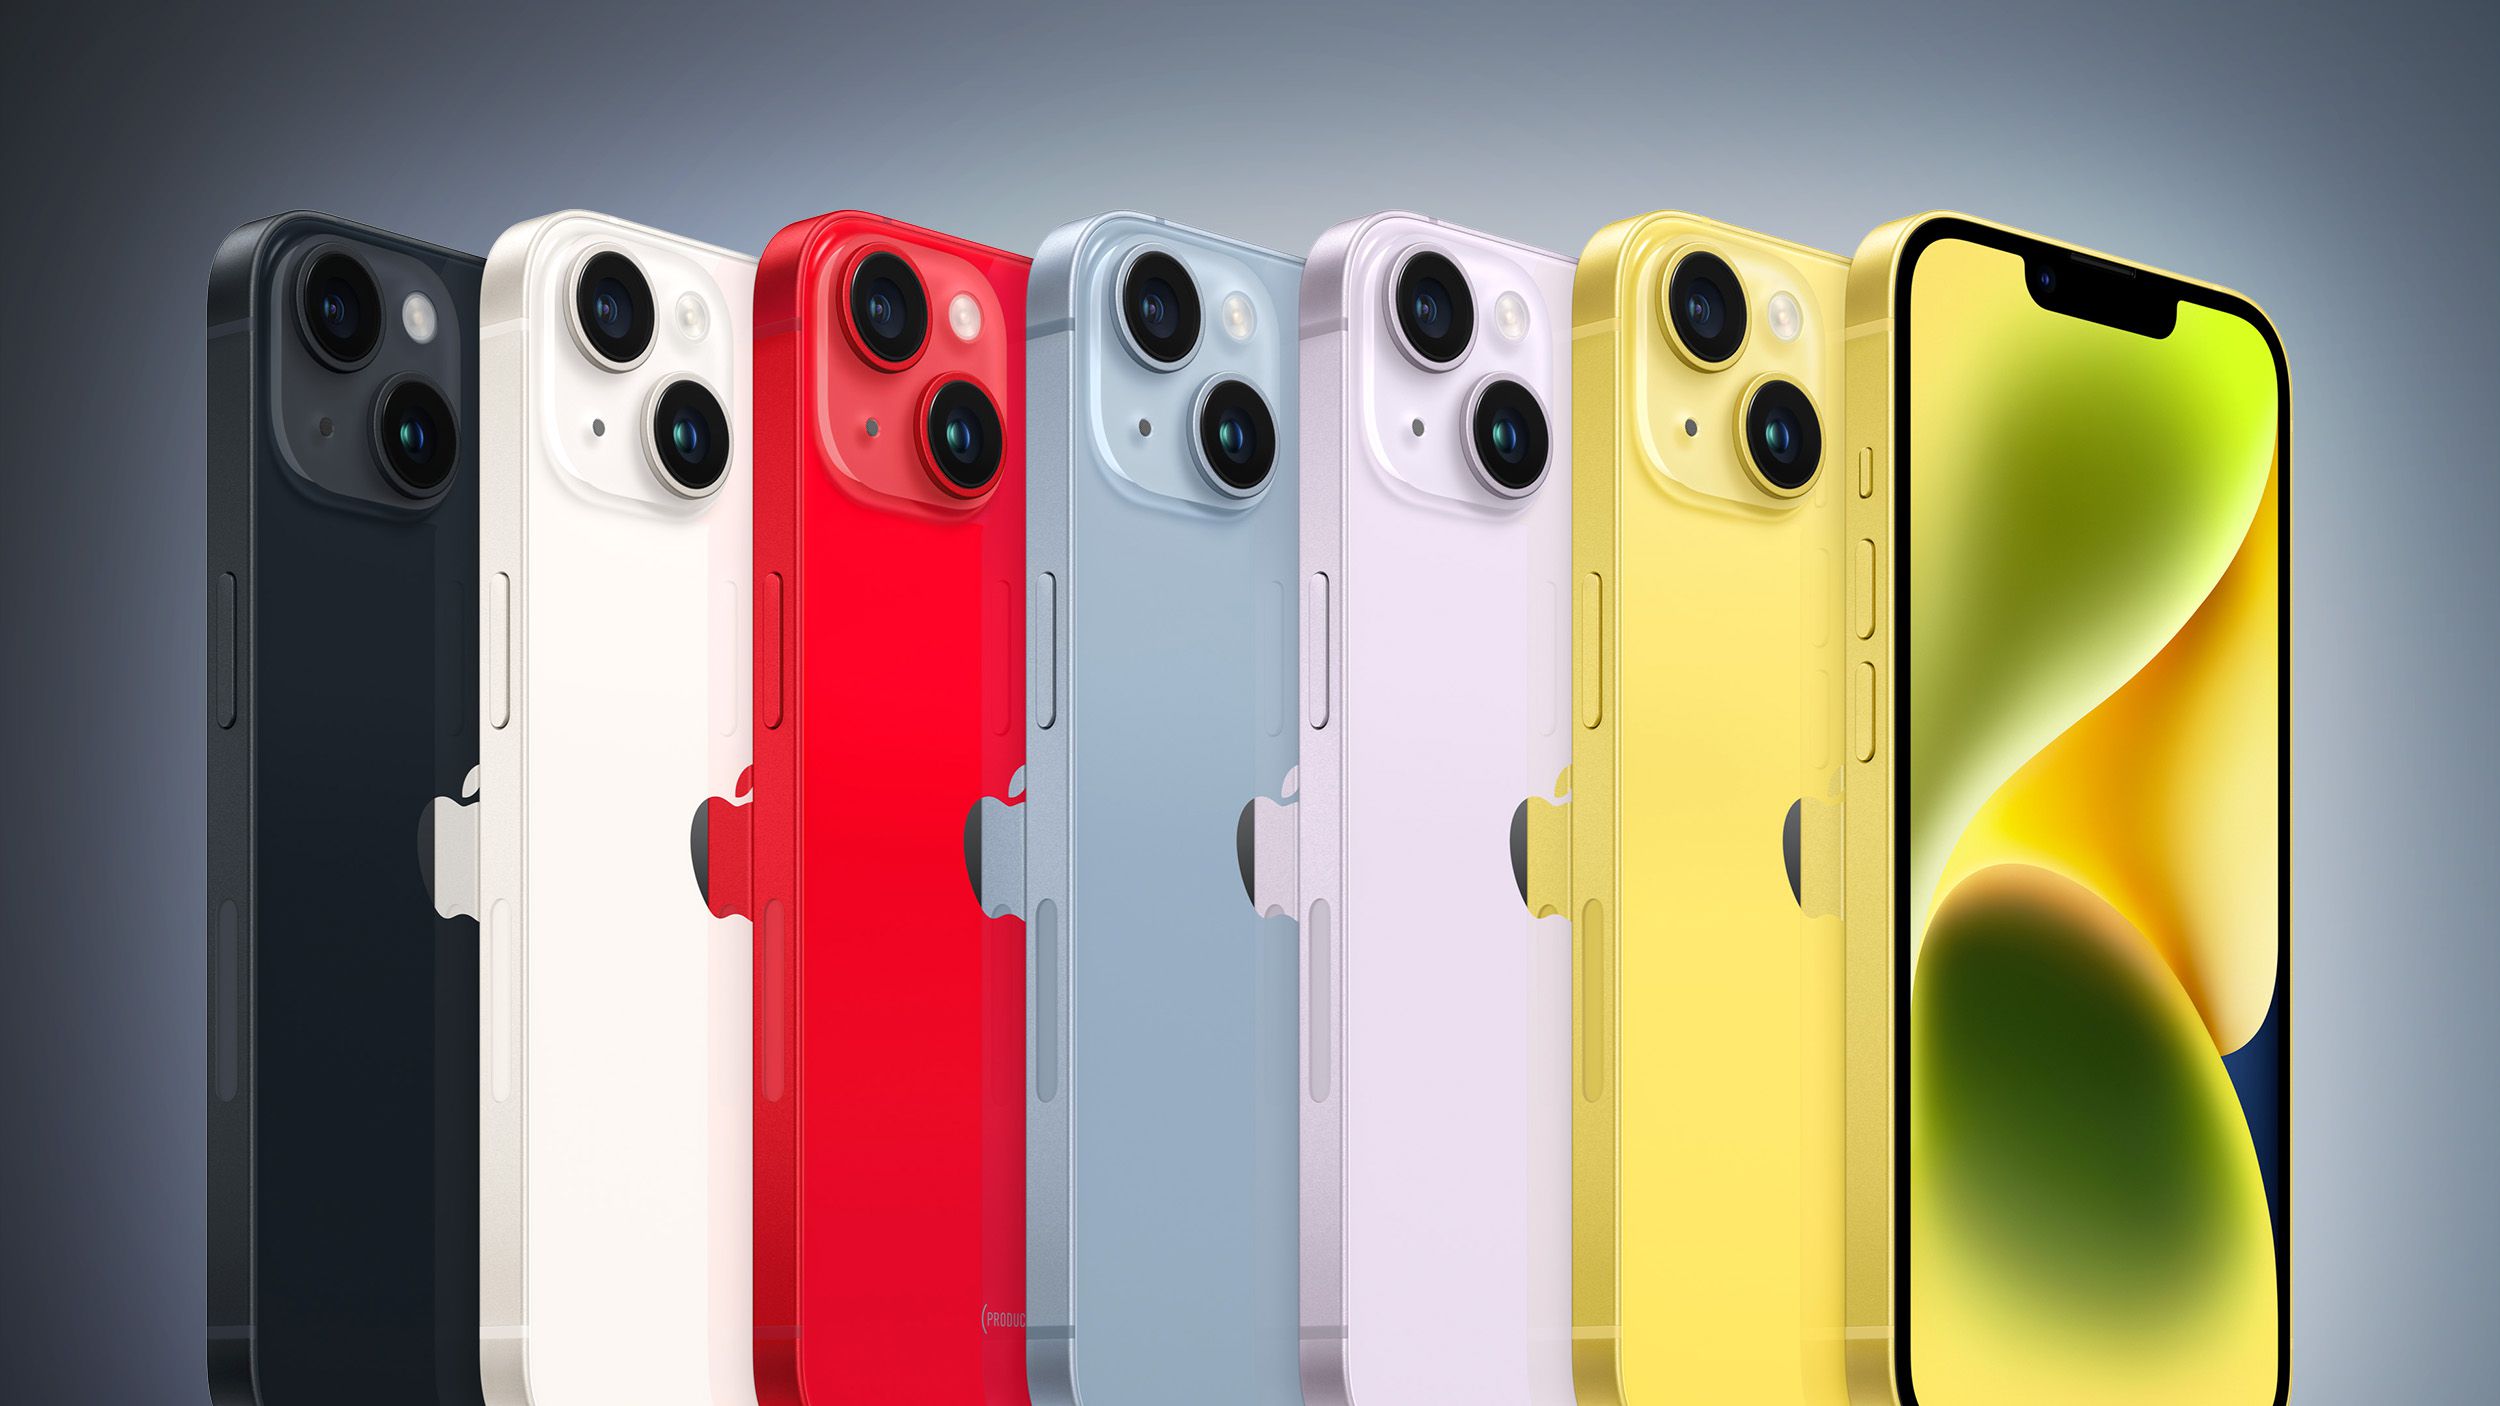 Will iPhone 14 have new colors?